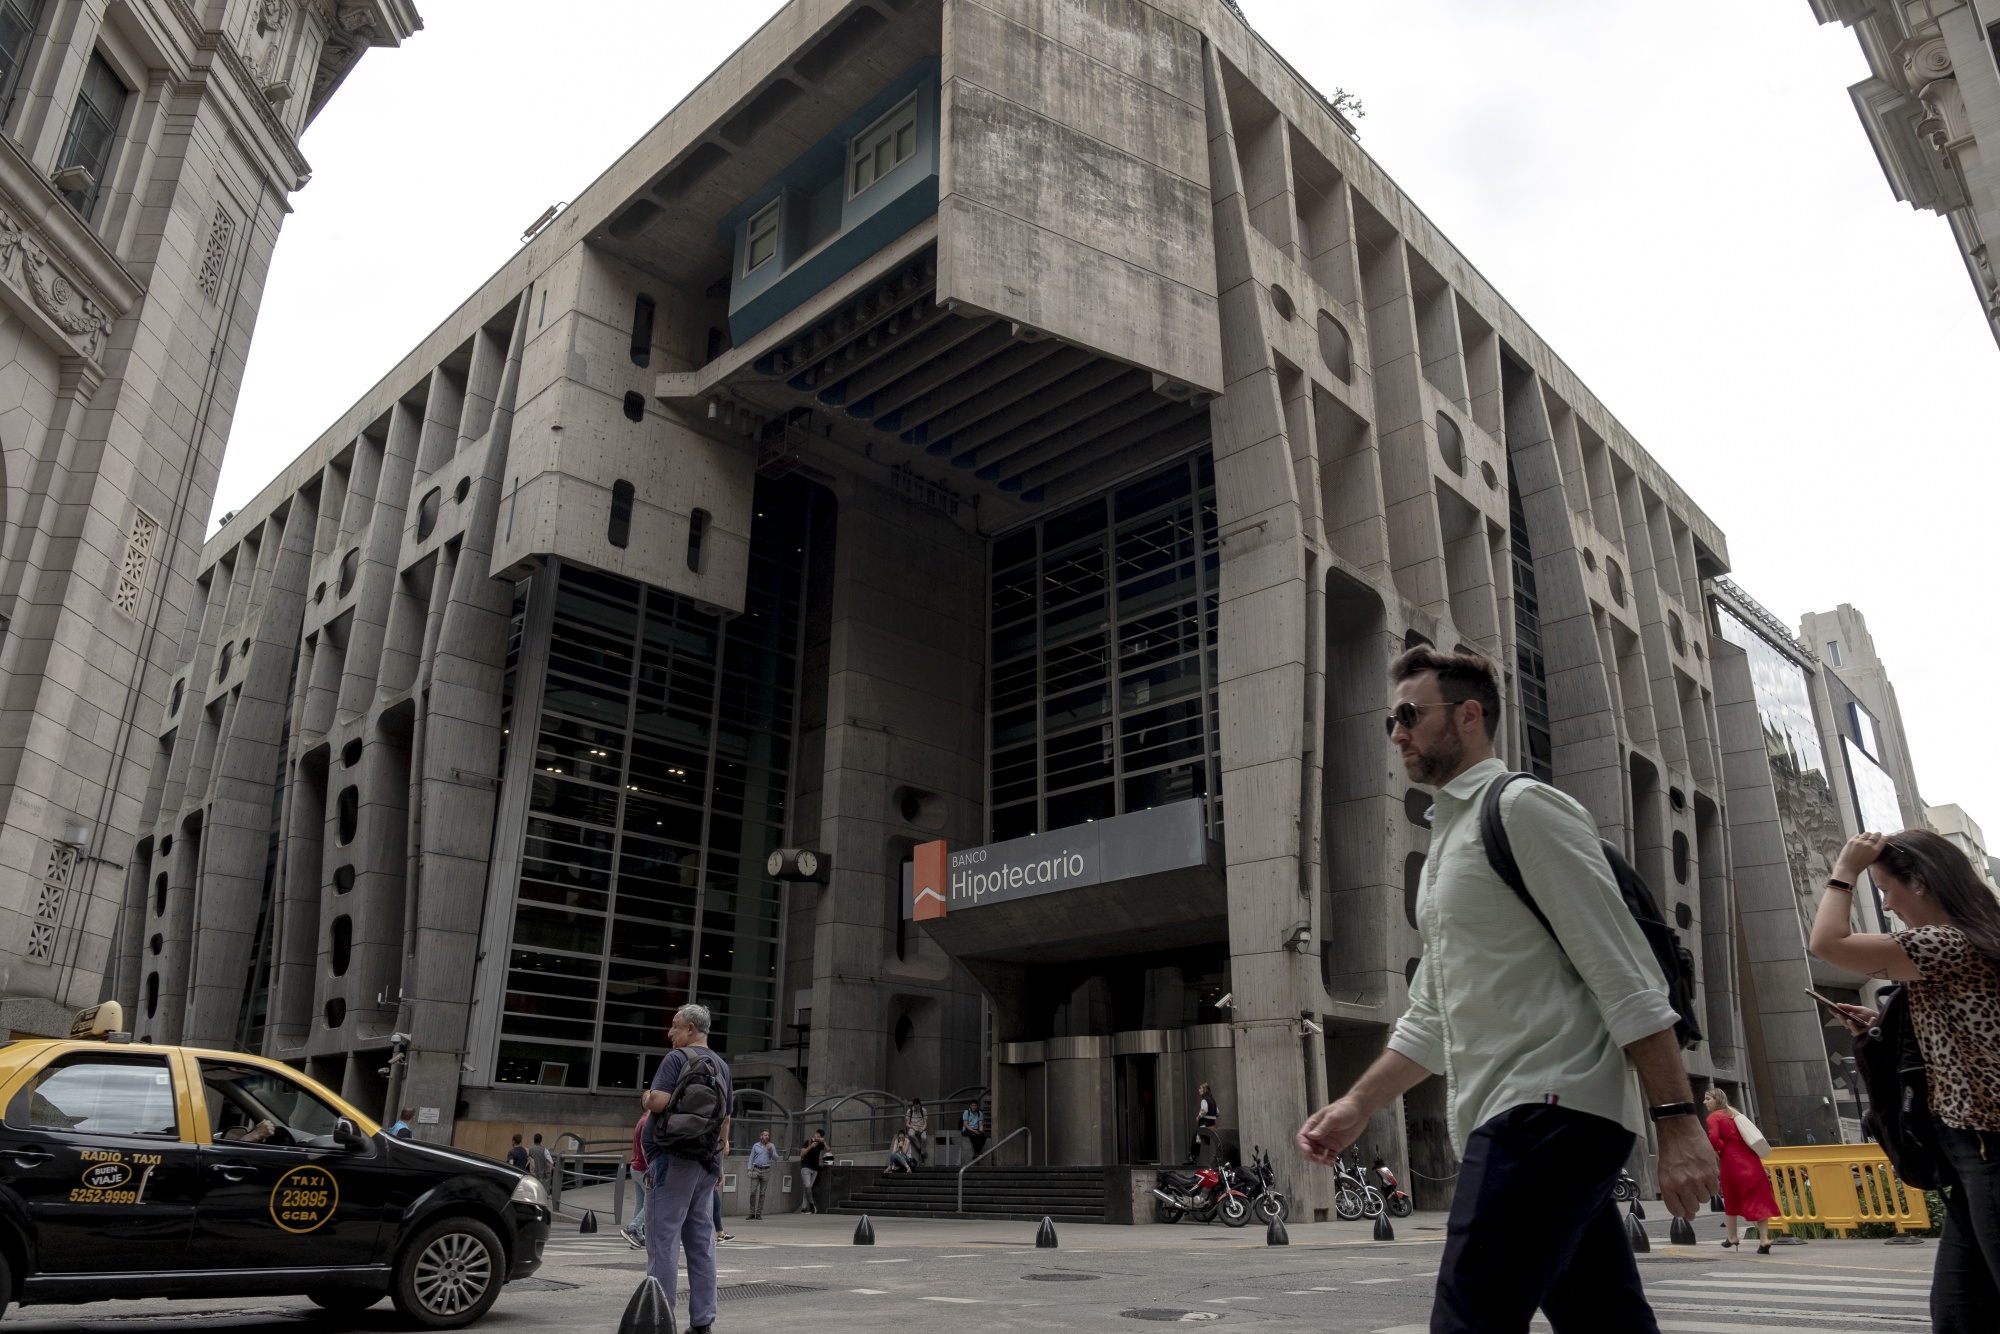 DiMo, platform of the Bank of Mexico, is ready for payments in businesses